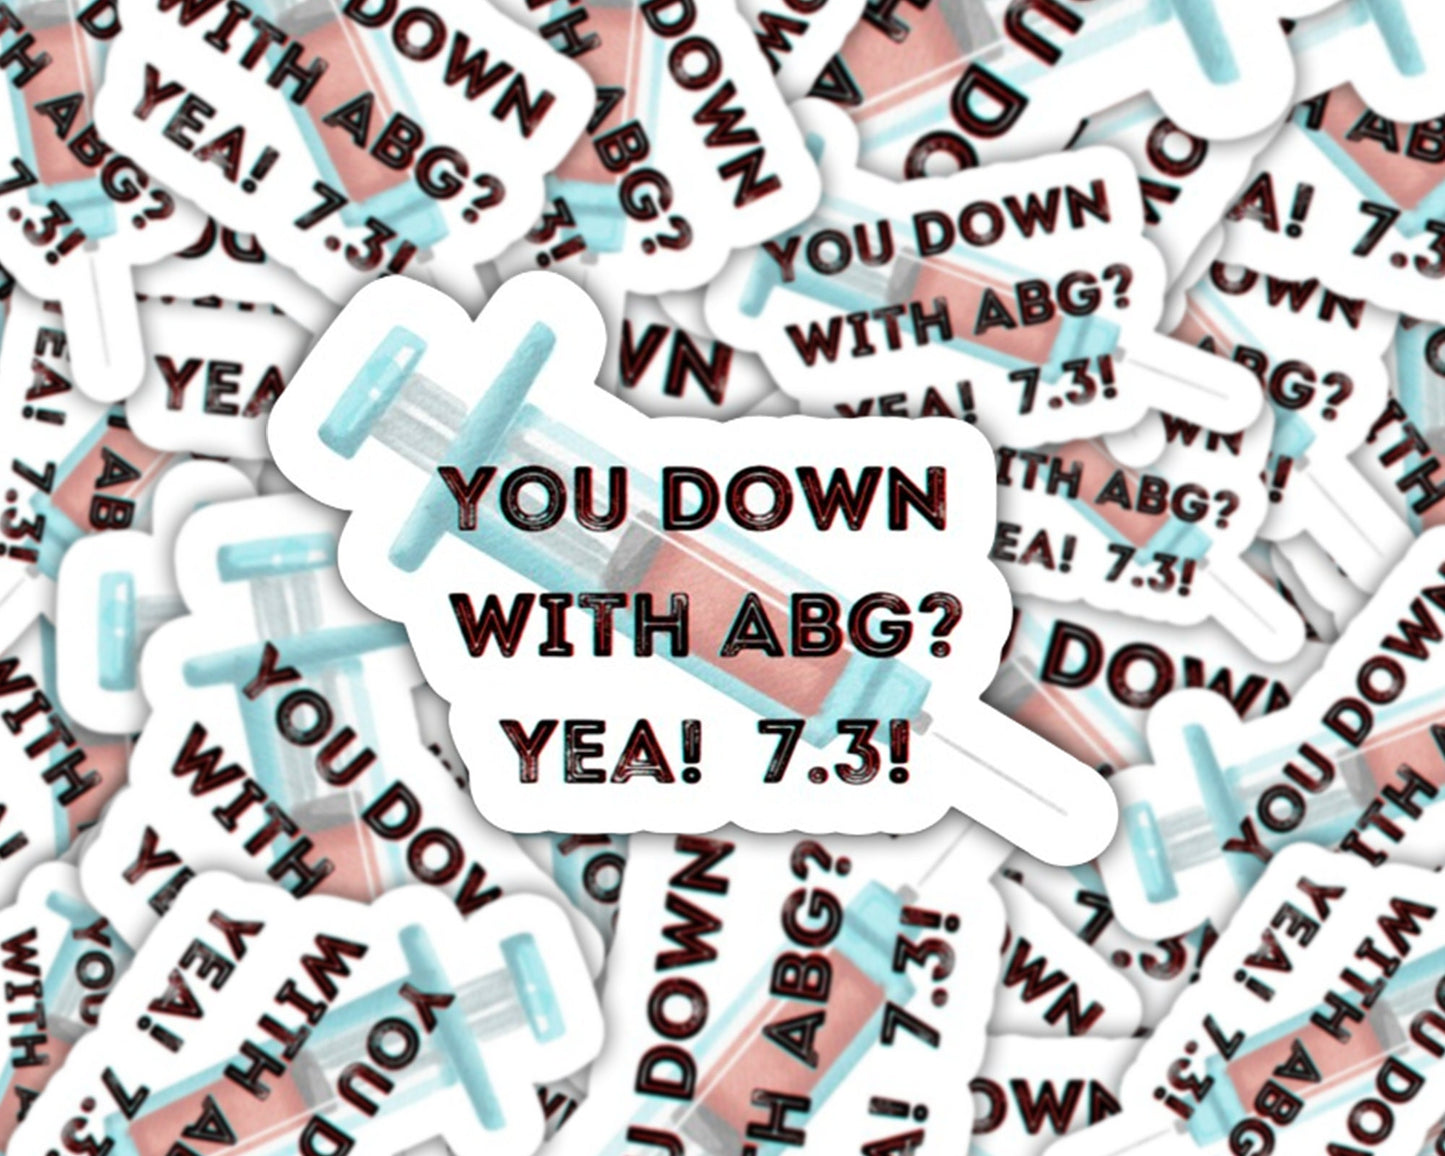 you down with abg, respiratory sticker, gifts for RT week, abg nursing, gifts for rt, pulmonologist sticker, respiratory therapy sticker